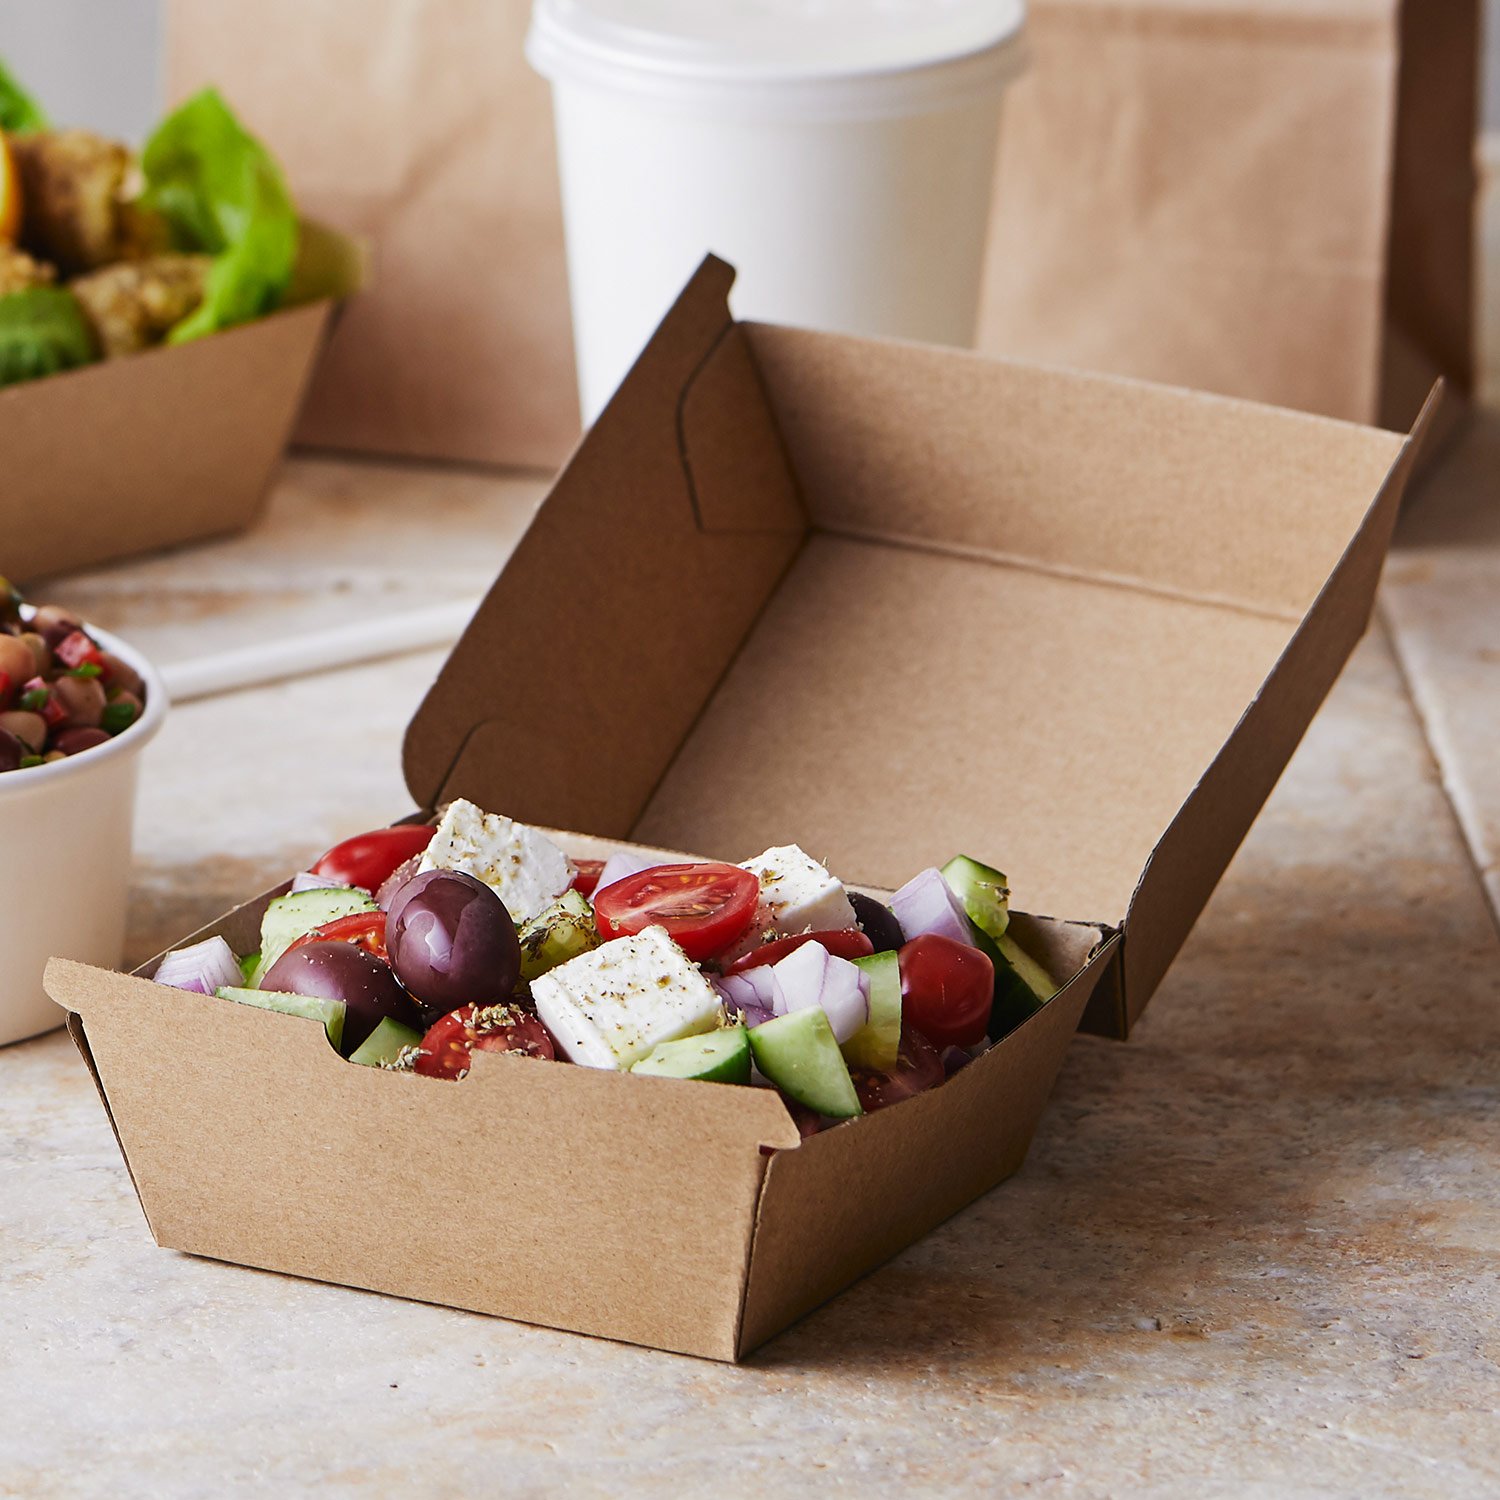 Image of Detpak Endura carton manufactured with recycled content, with greek salad. 